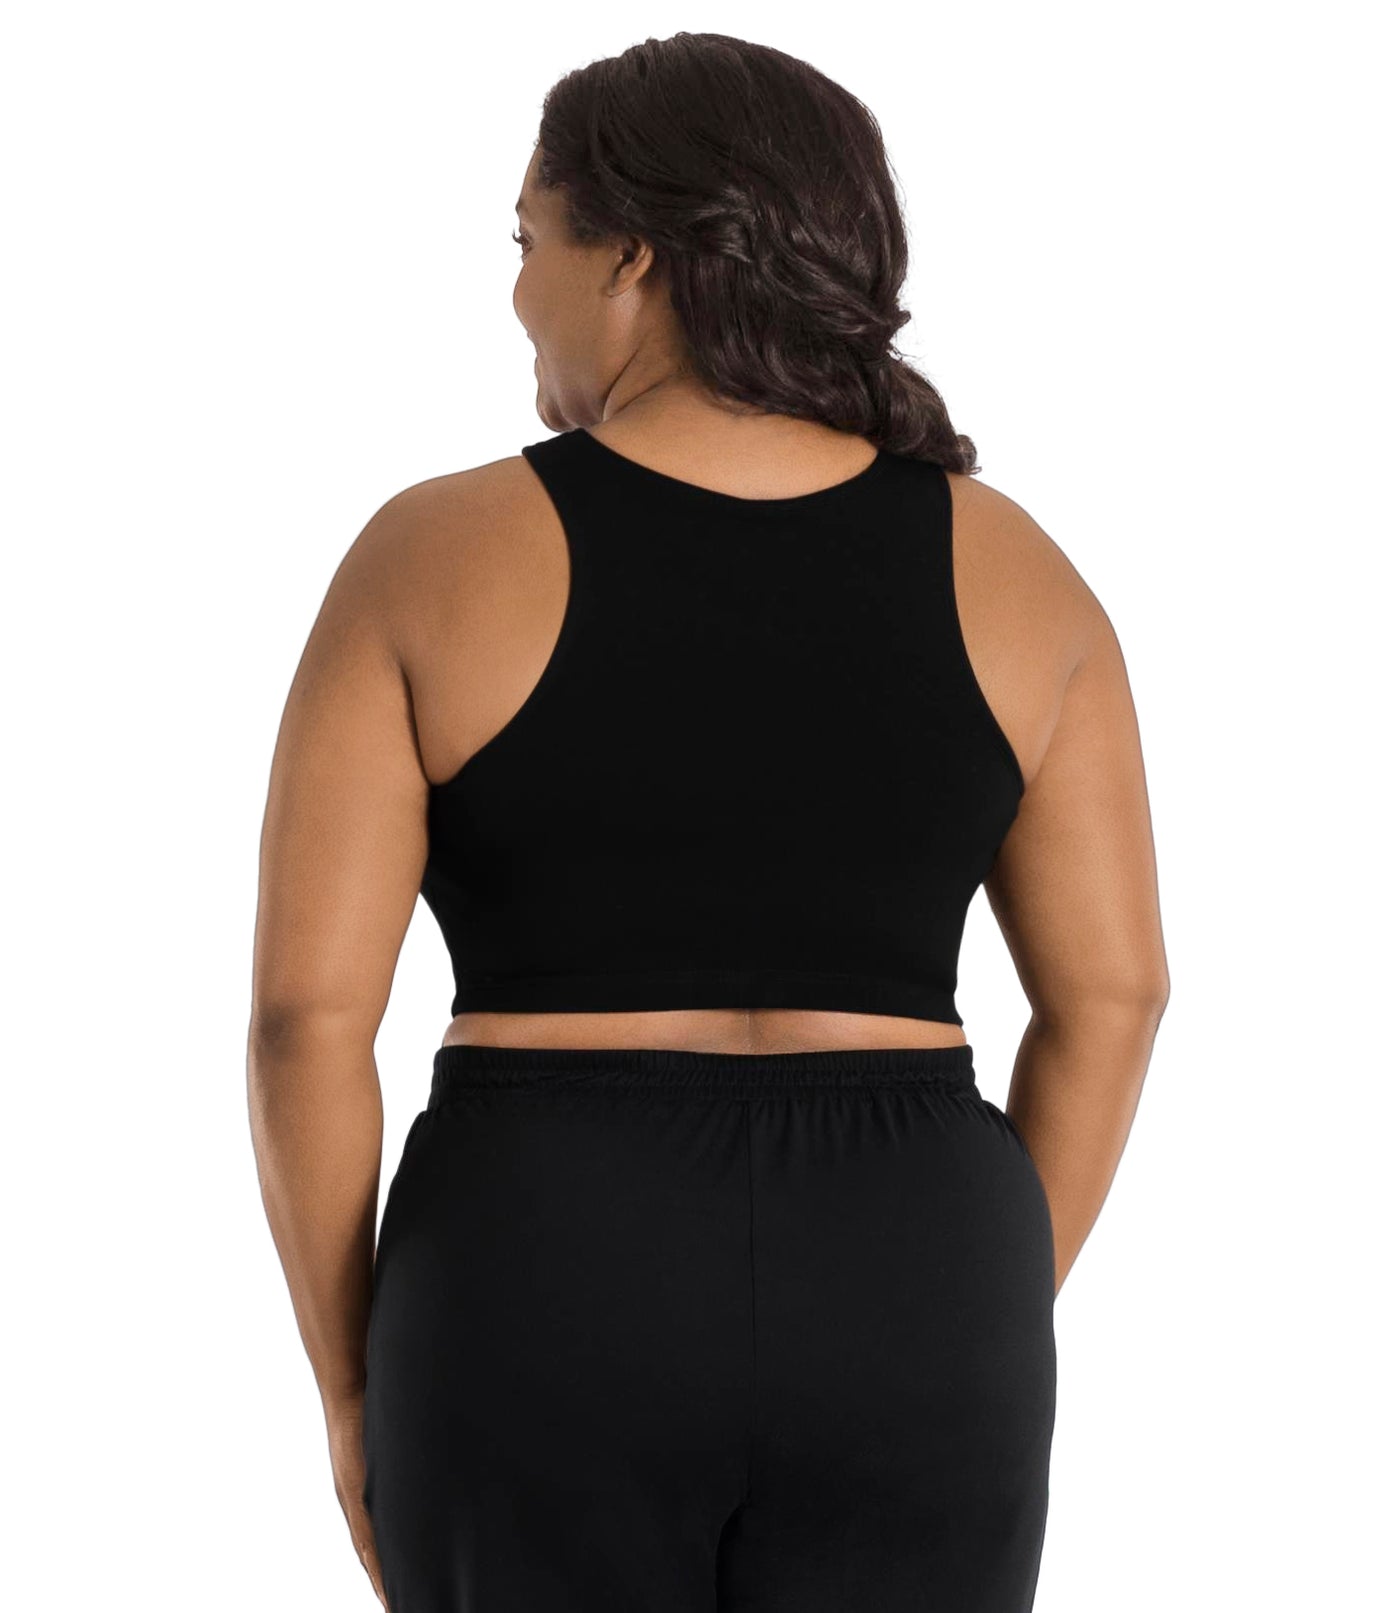 A plus size woman, facing back, wearing a black JunoActive Stretch naturals full fit plus size bra. Featuring a v-neck and side bust darts for a full fit. She is also wearing black JunoActive plus size pants.